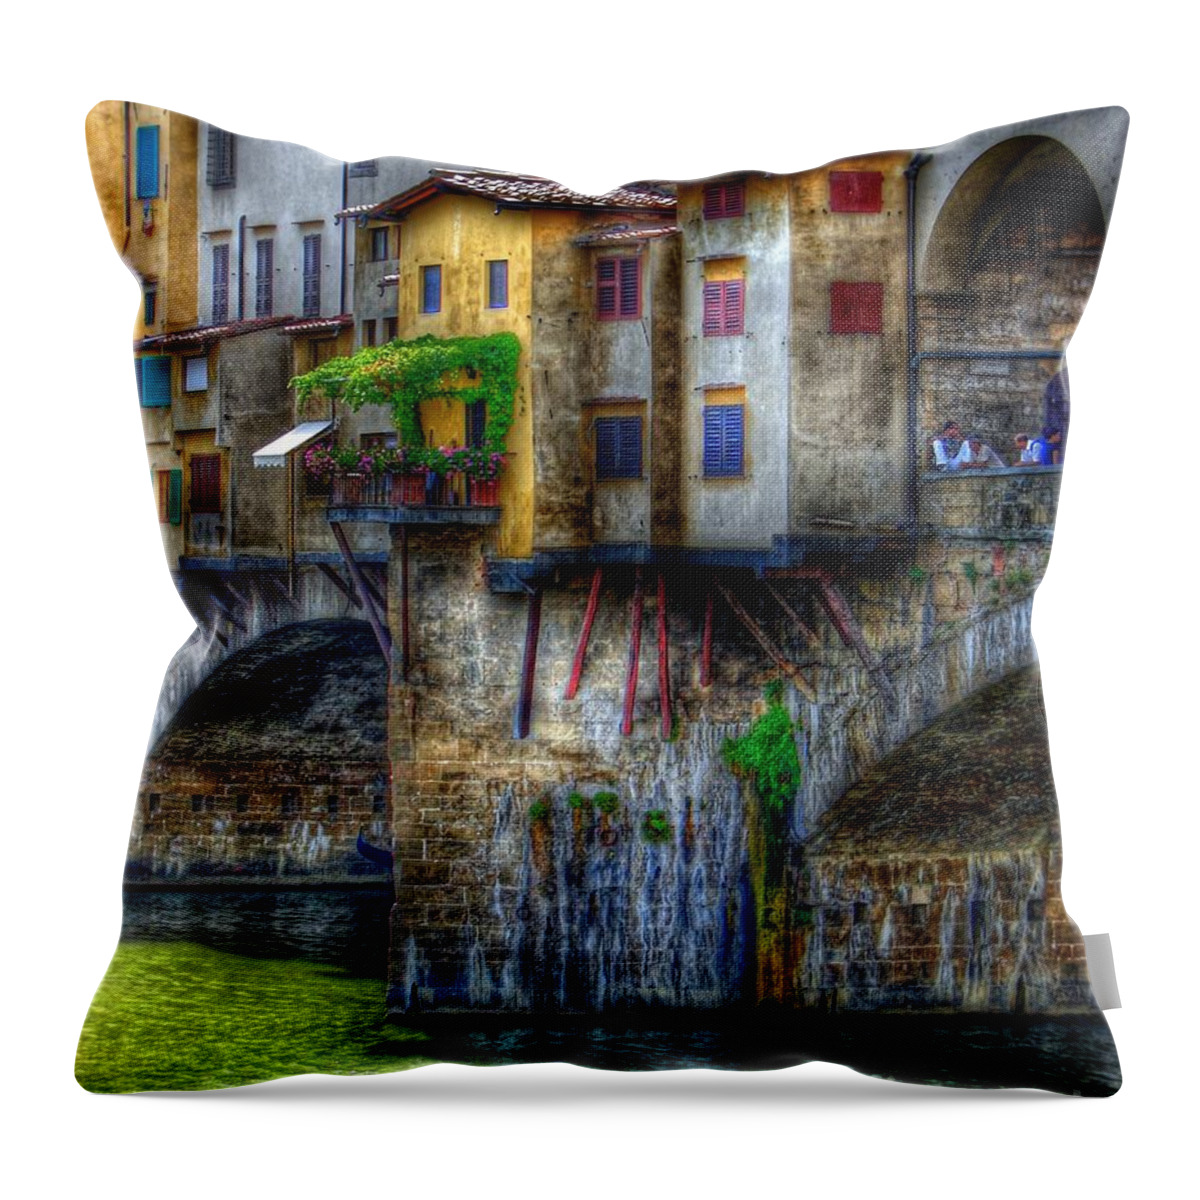 Room With A View Throw Pillow featuring the photograph Room With A View by Patrick Witz